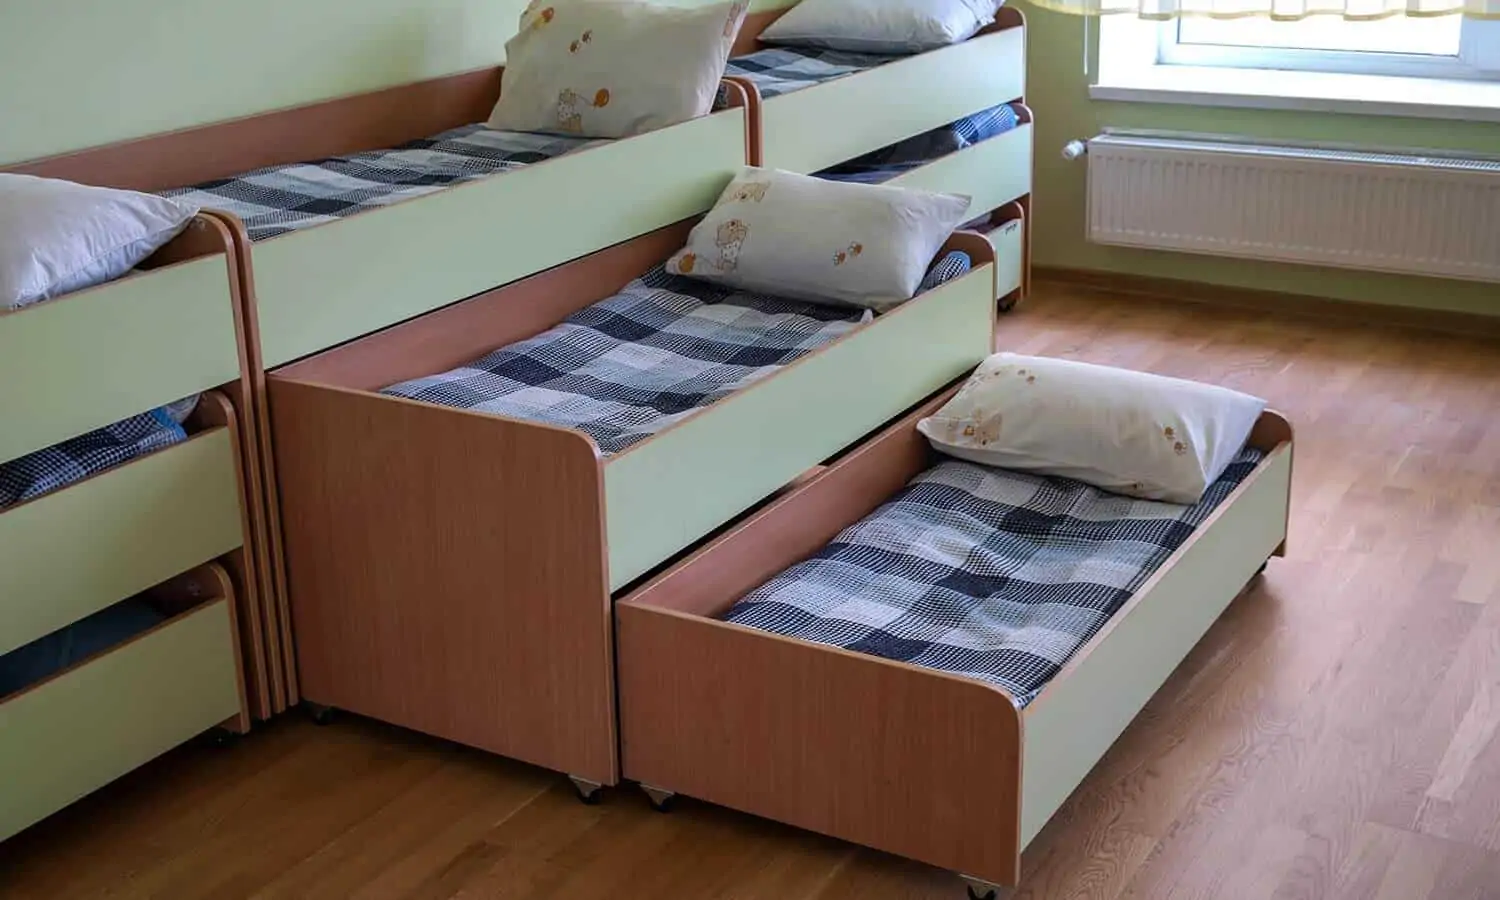  wooden trundle for kids, space saving bed like futon